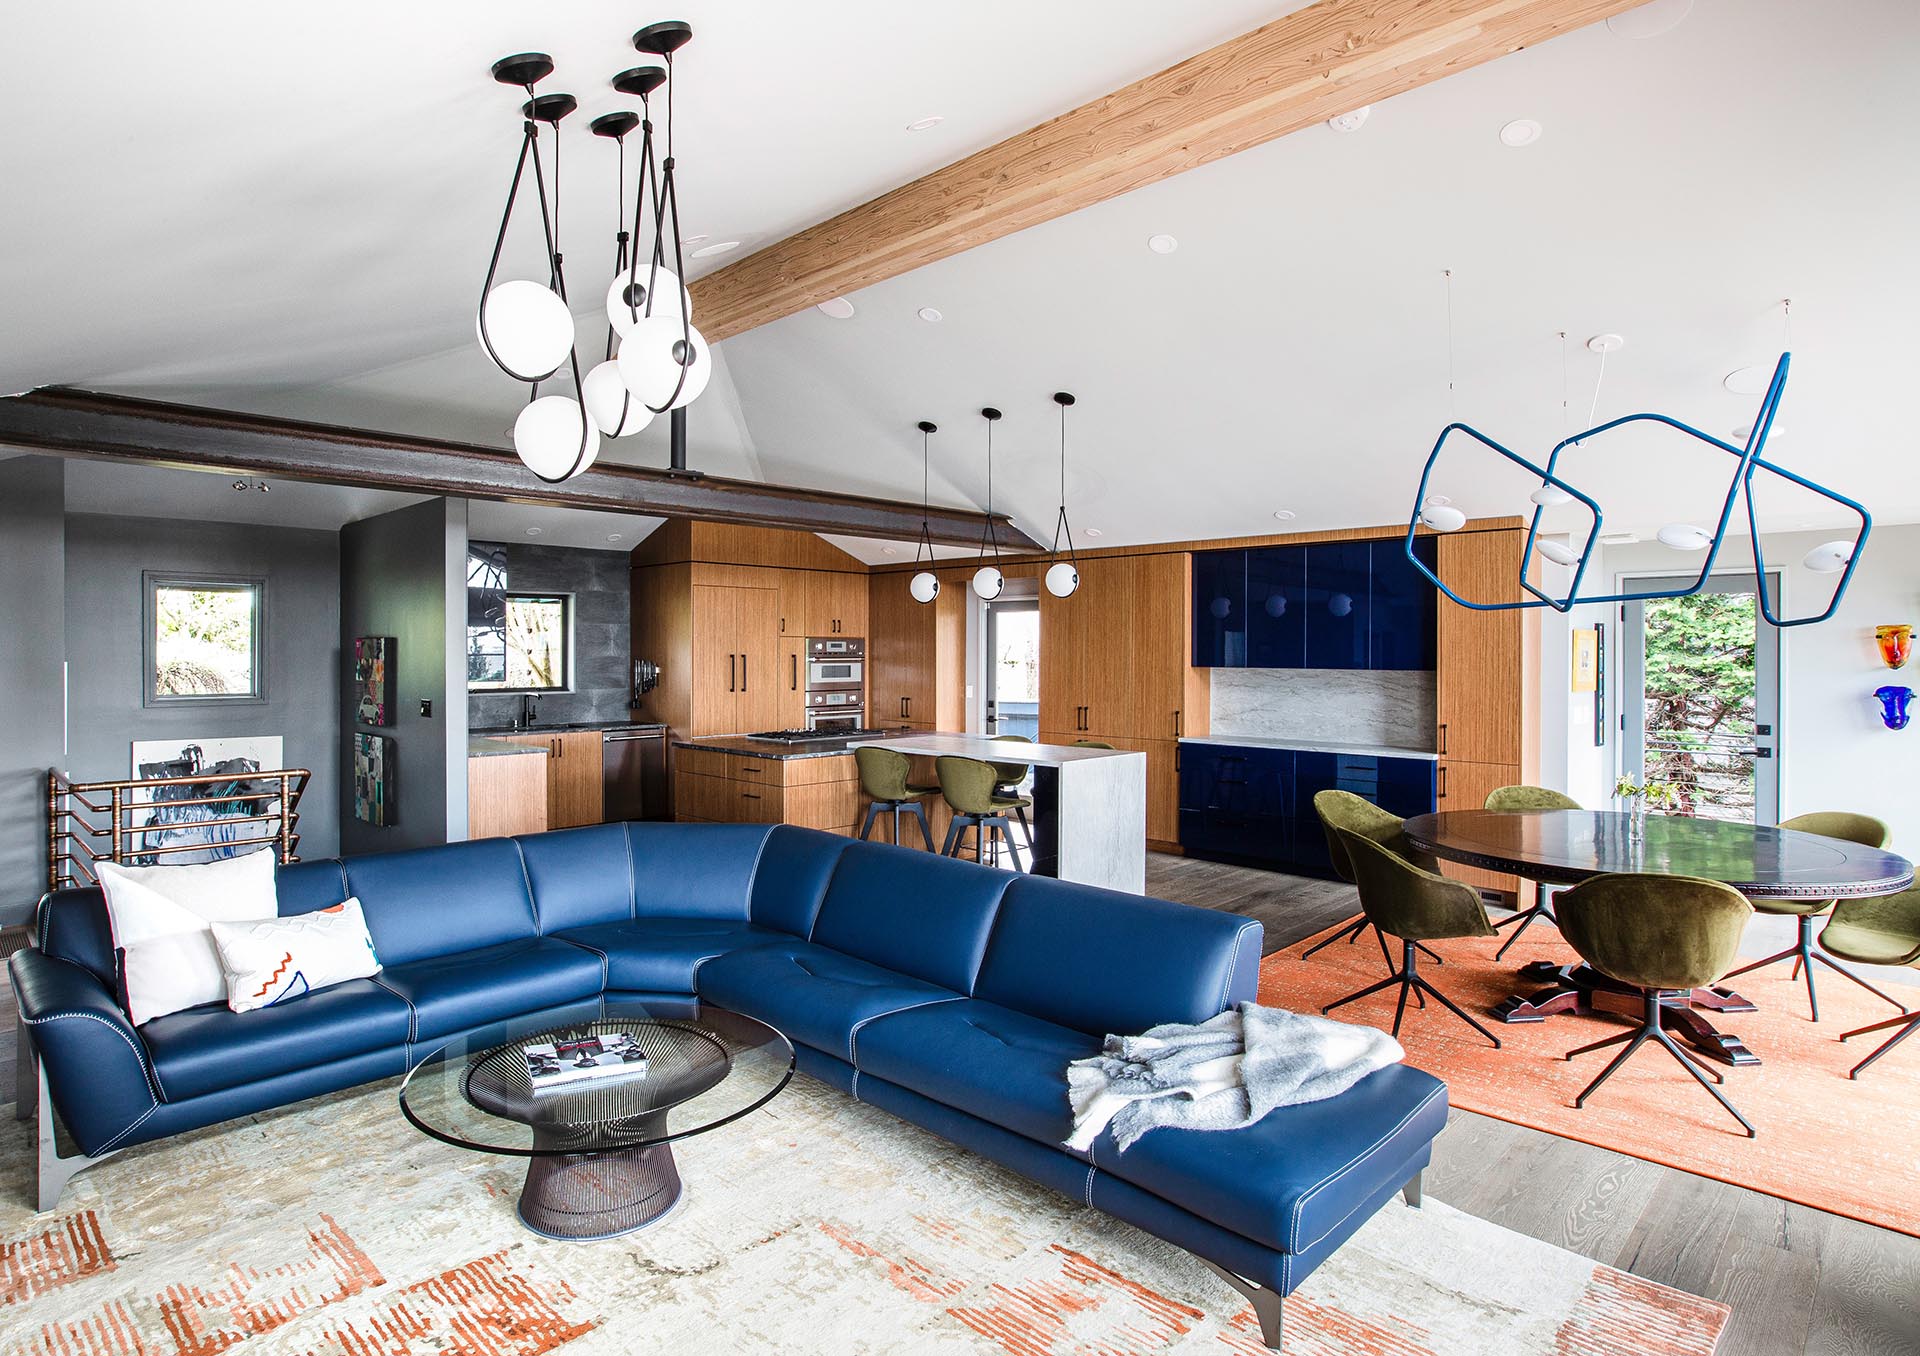 Renovated open concept living room with exposed wood and steel beams and natural teak kitchen cabinets with blue accents.